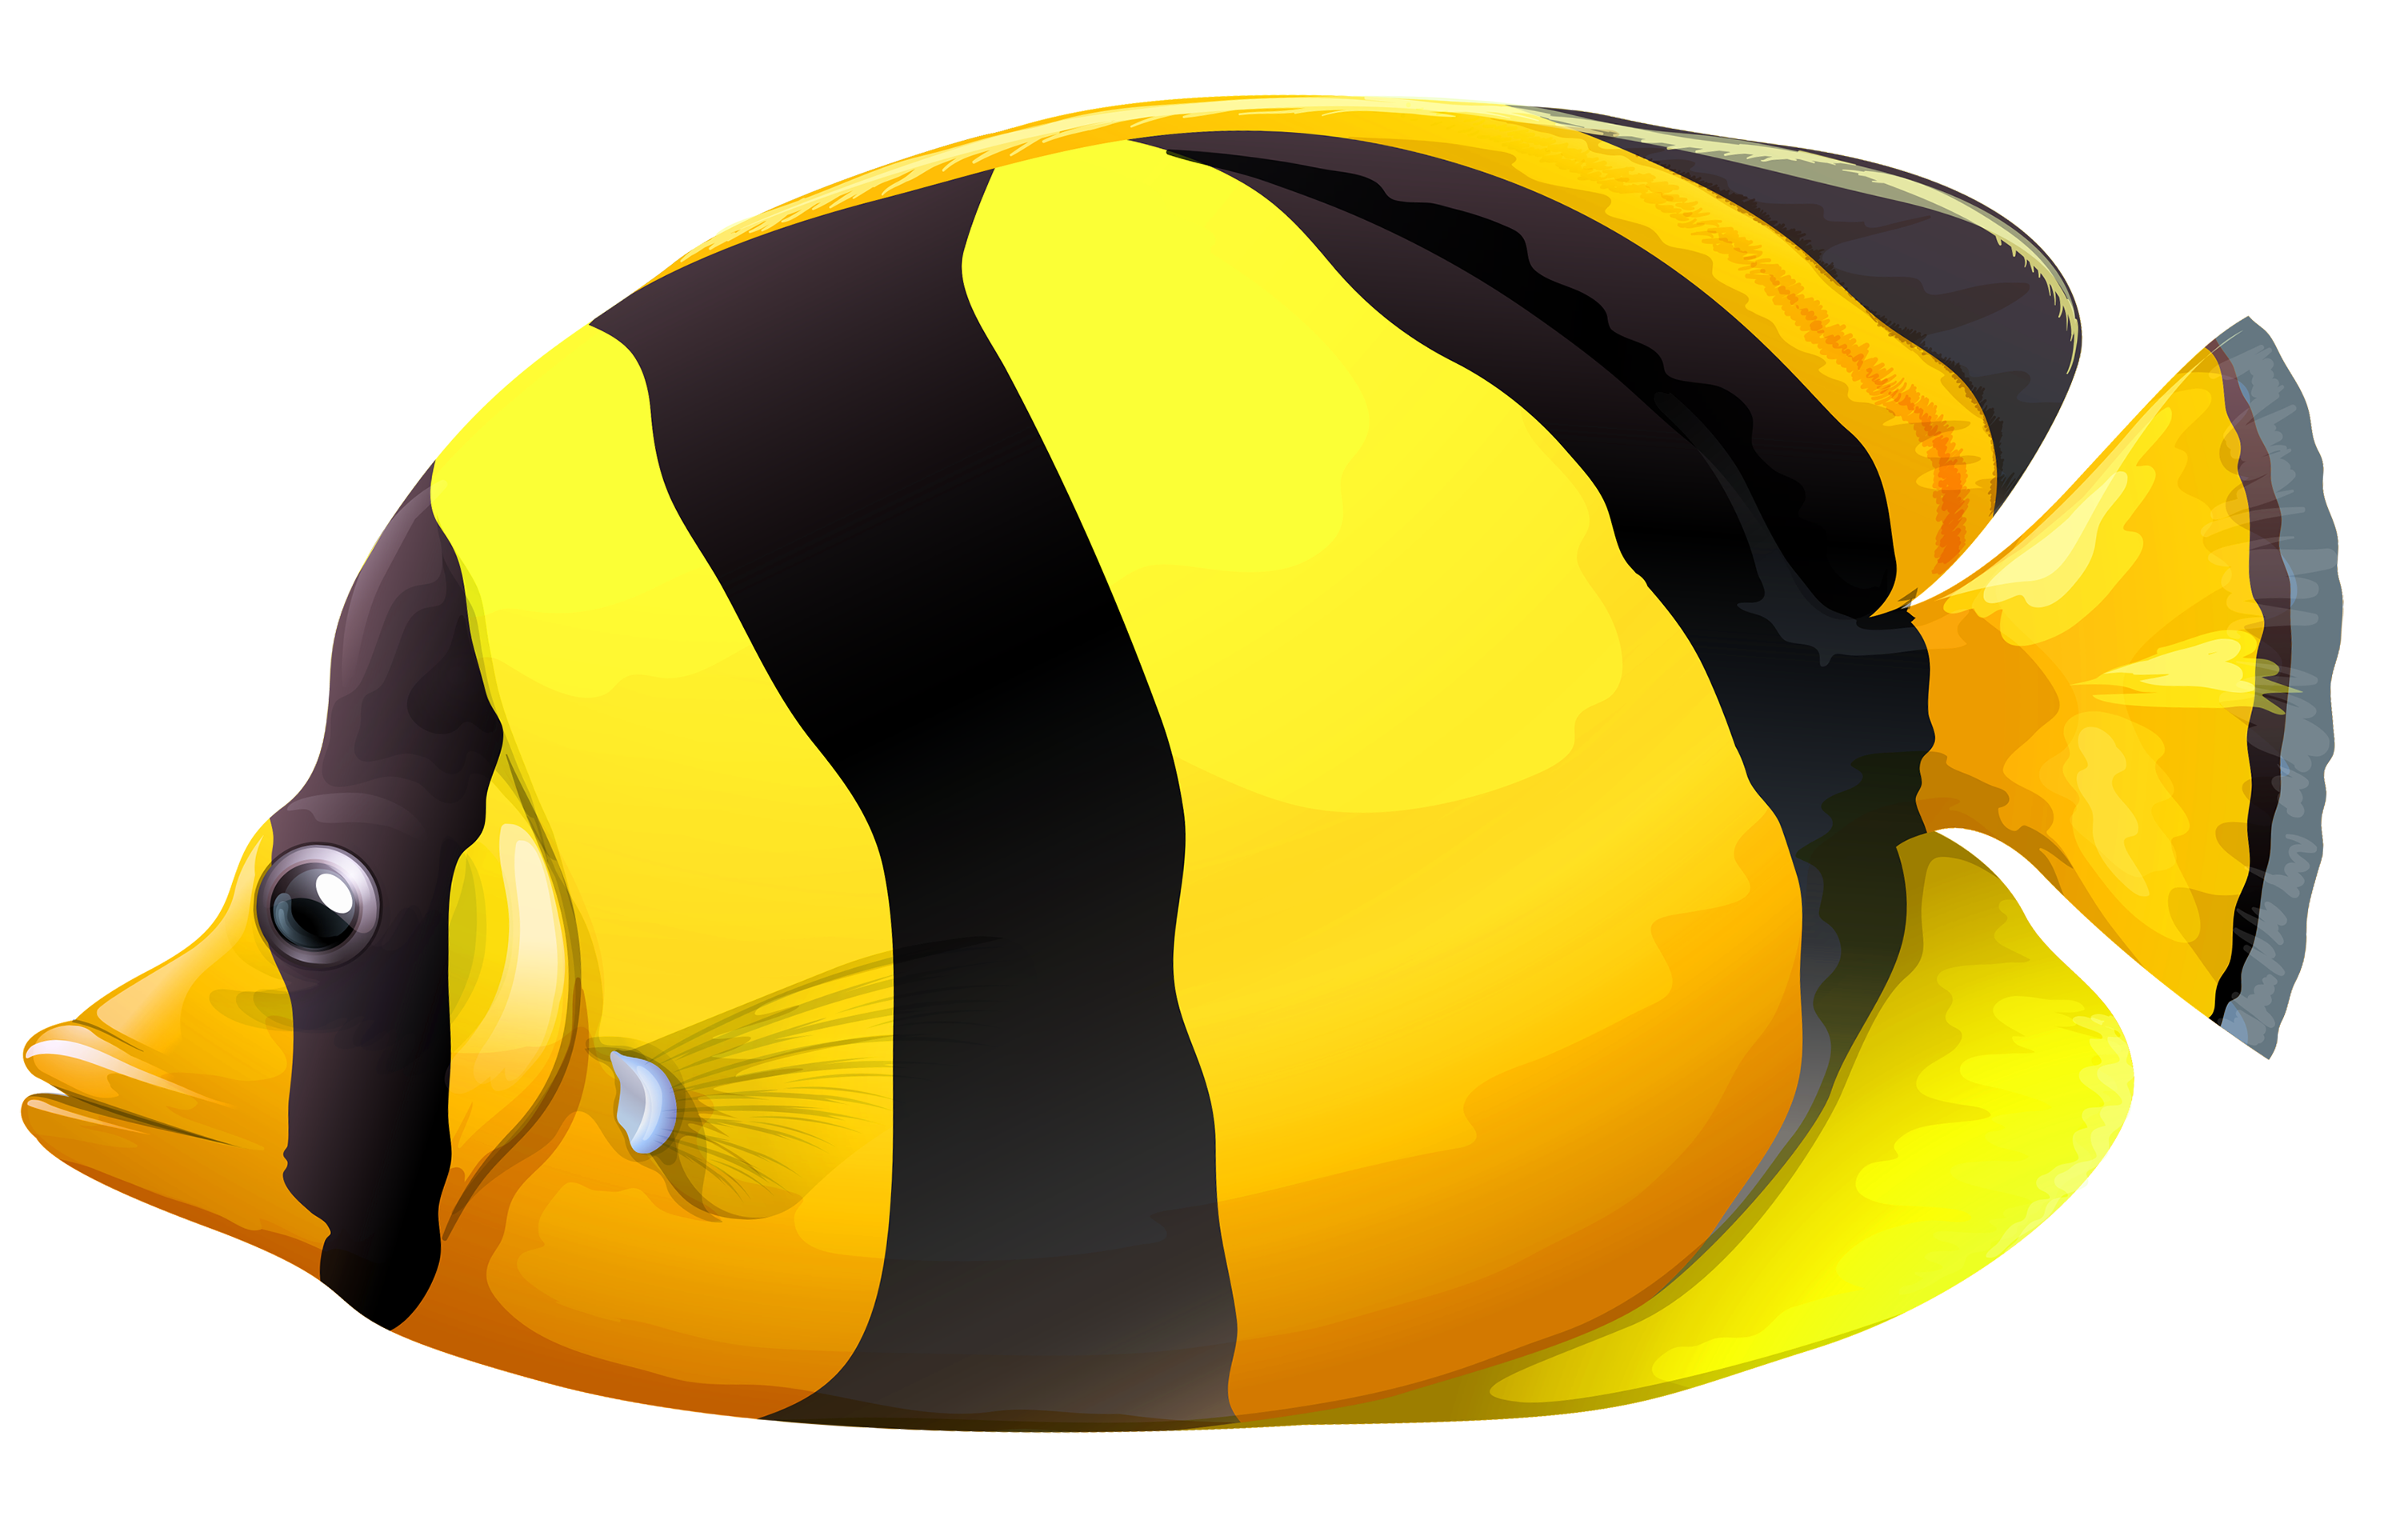 Wagon clipart yellow. Chaetodon butterfly fish png